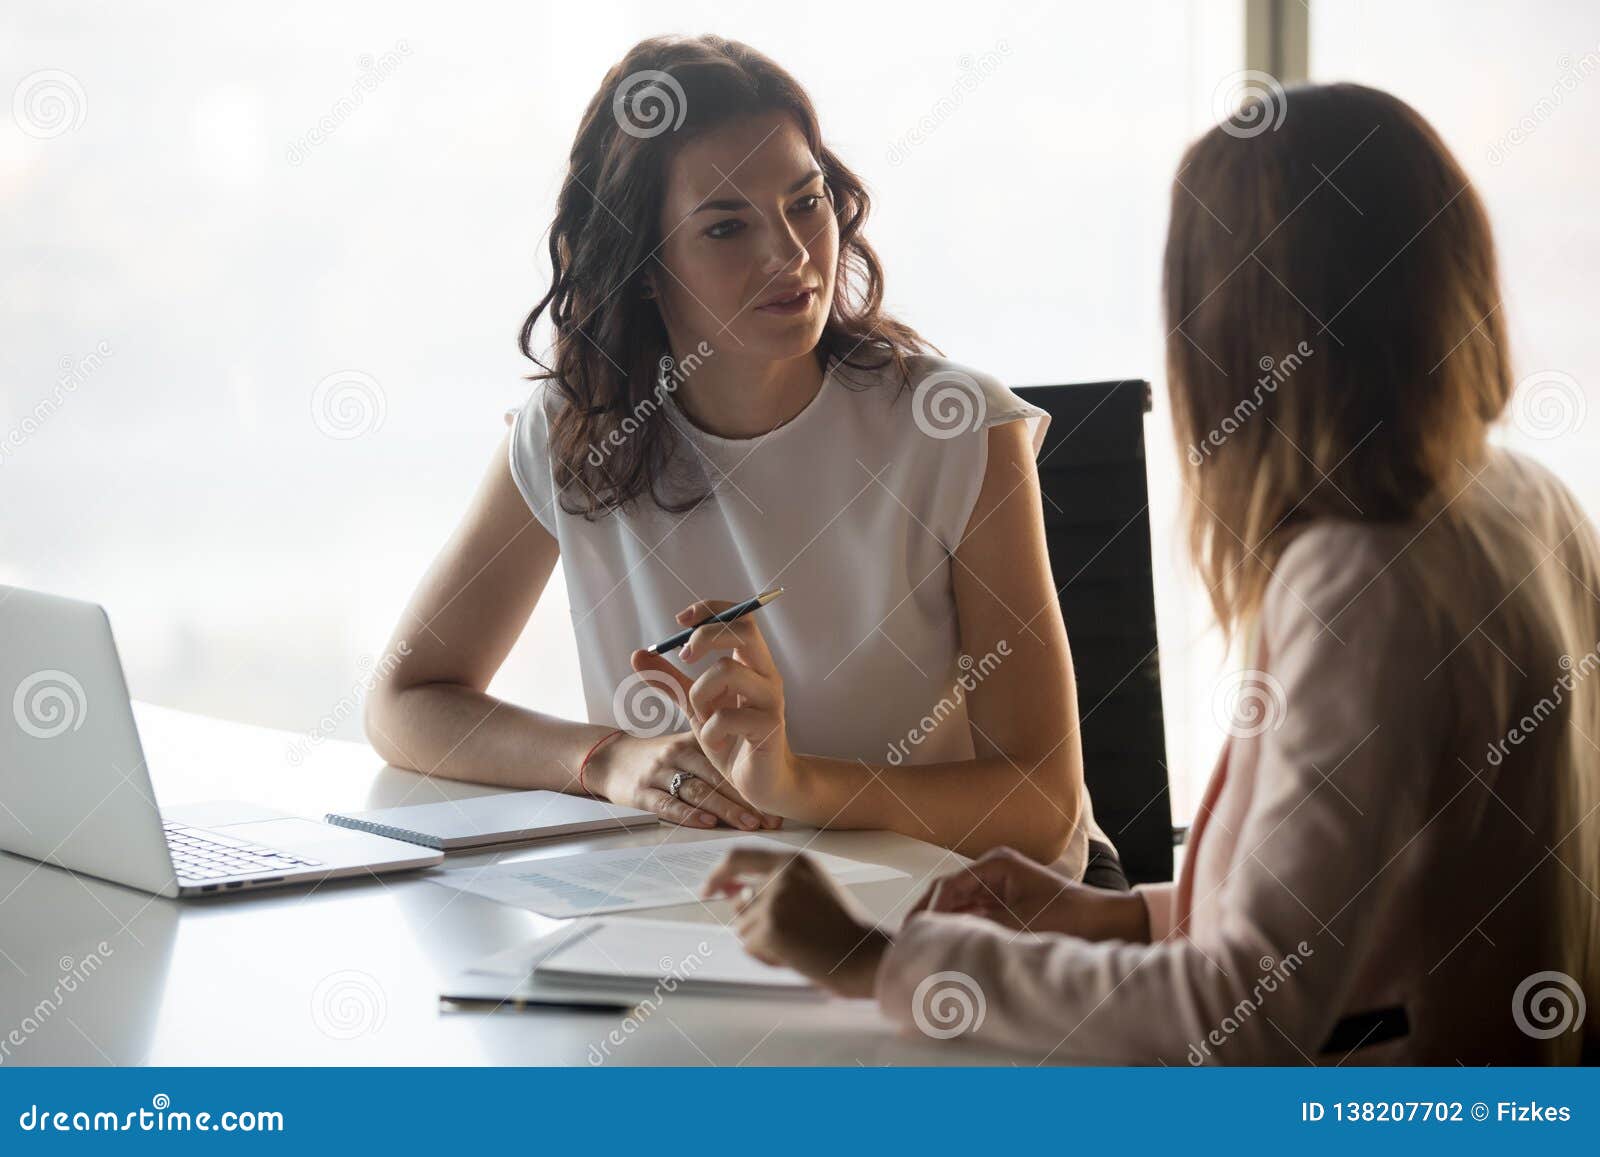 two diverse serious businesswomen talking working together in office